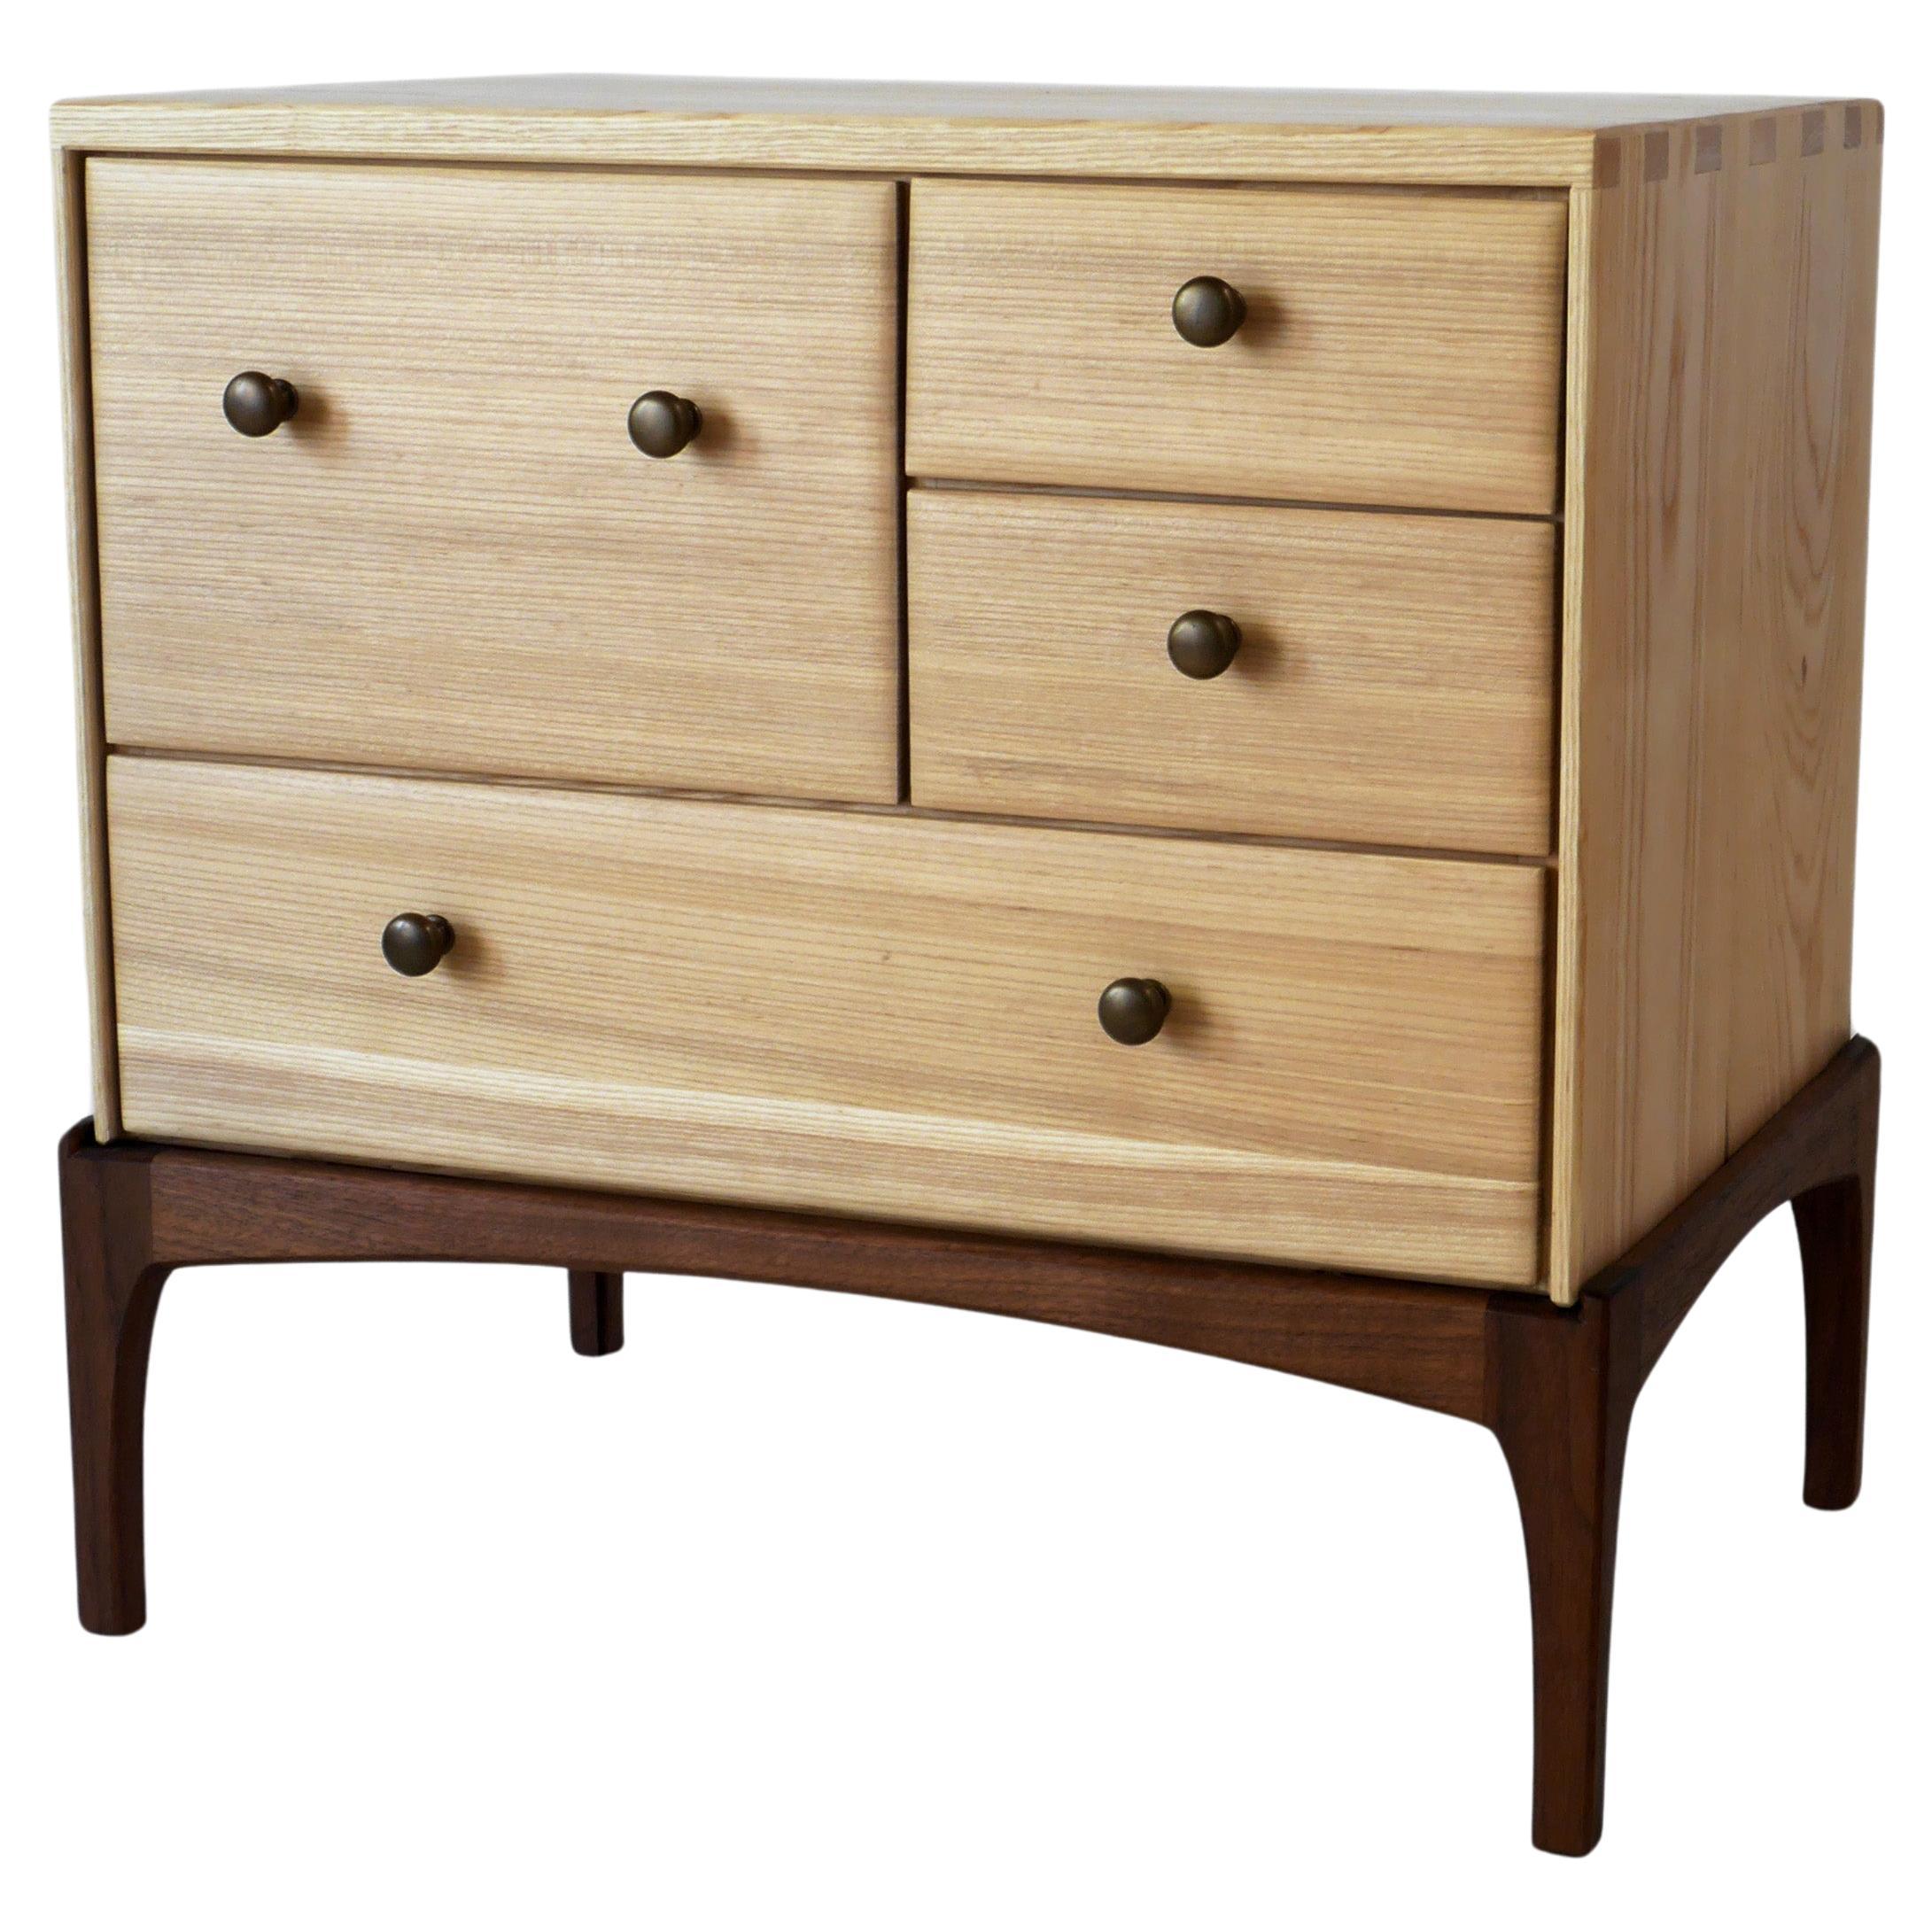 Ash Aurora Nightstand Four Drawer Modern Bedside Table/ Chest of Drawers by Arid im Angebot